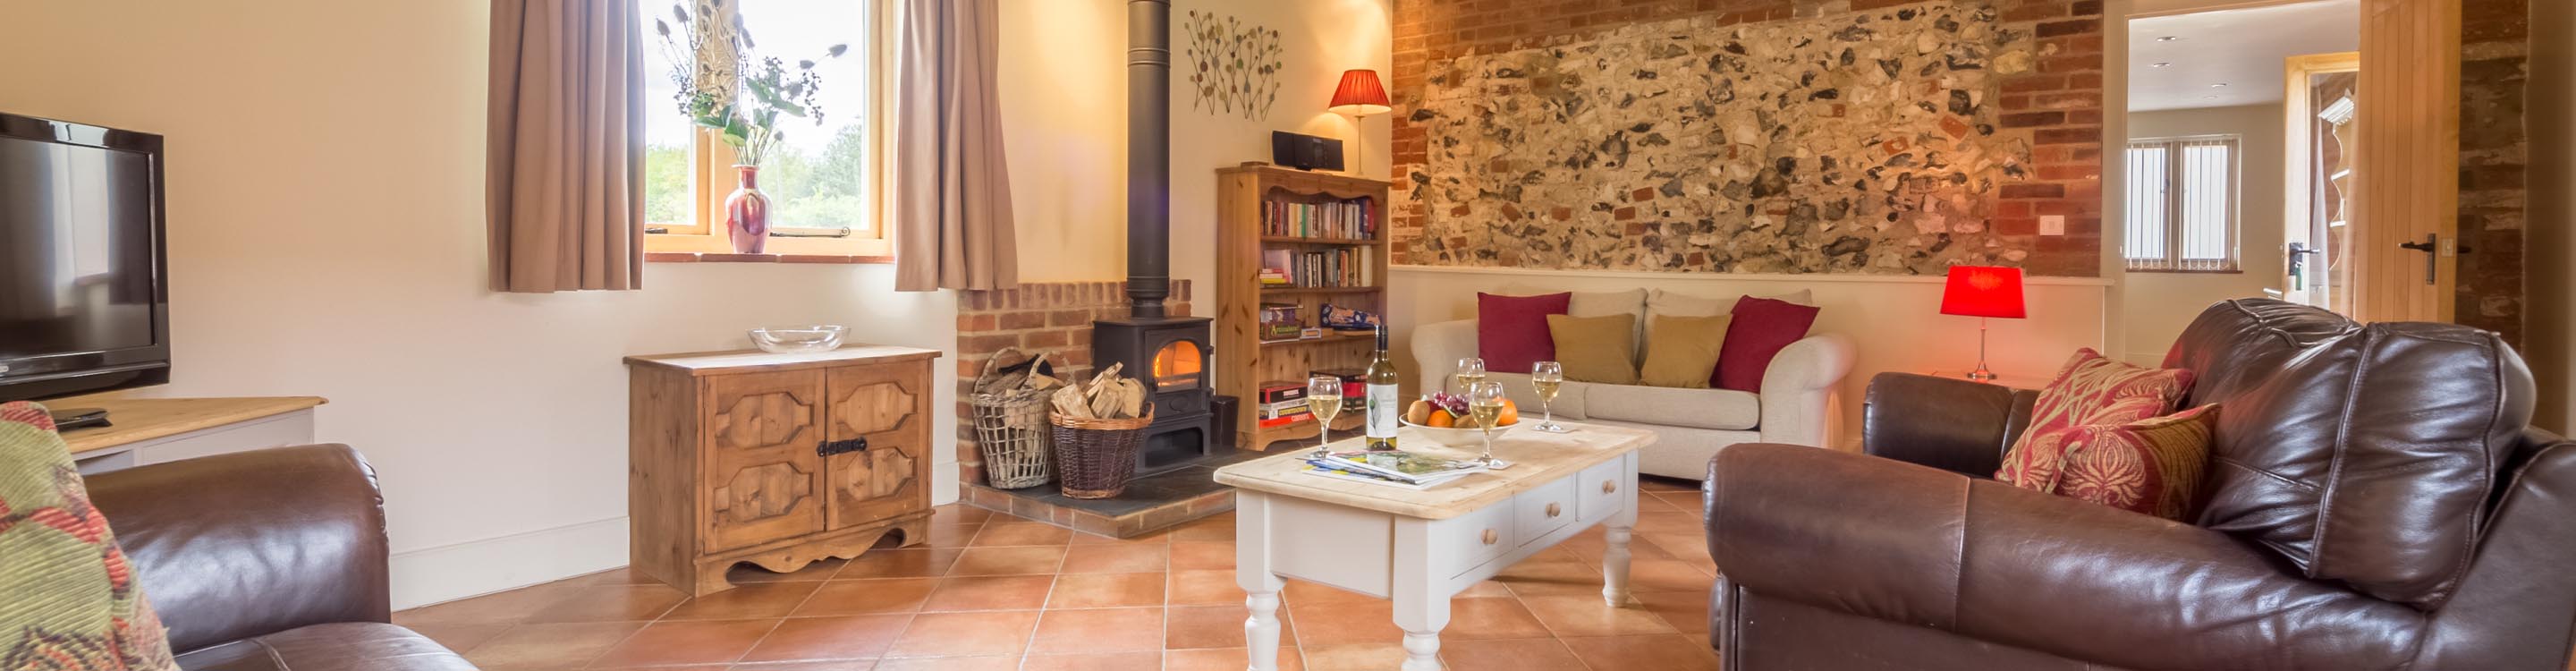 Self-Catering and Luxury Bed & Breakfast Accommodation in Norfolk